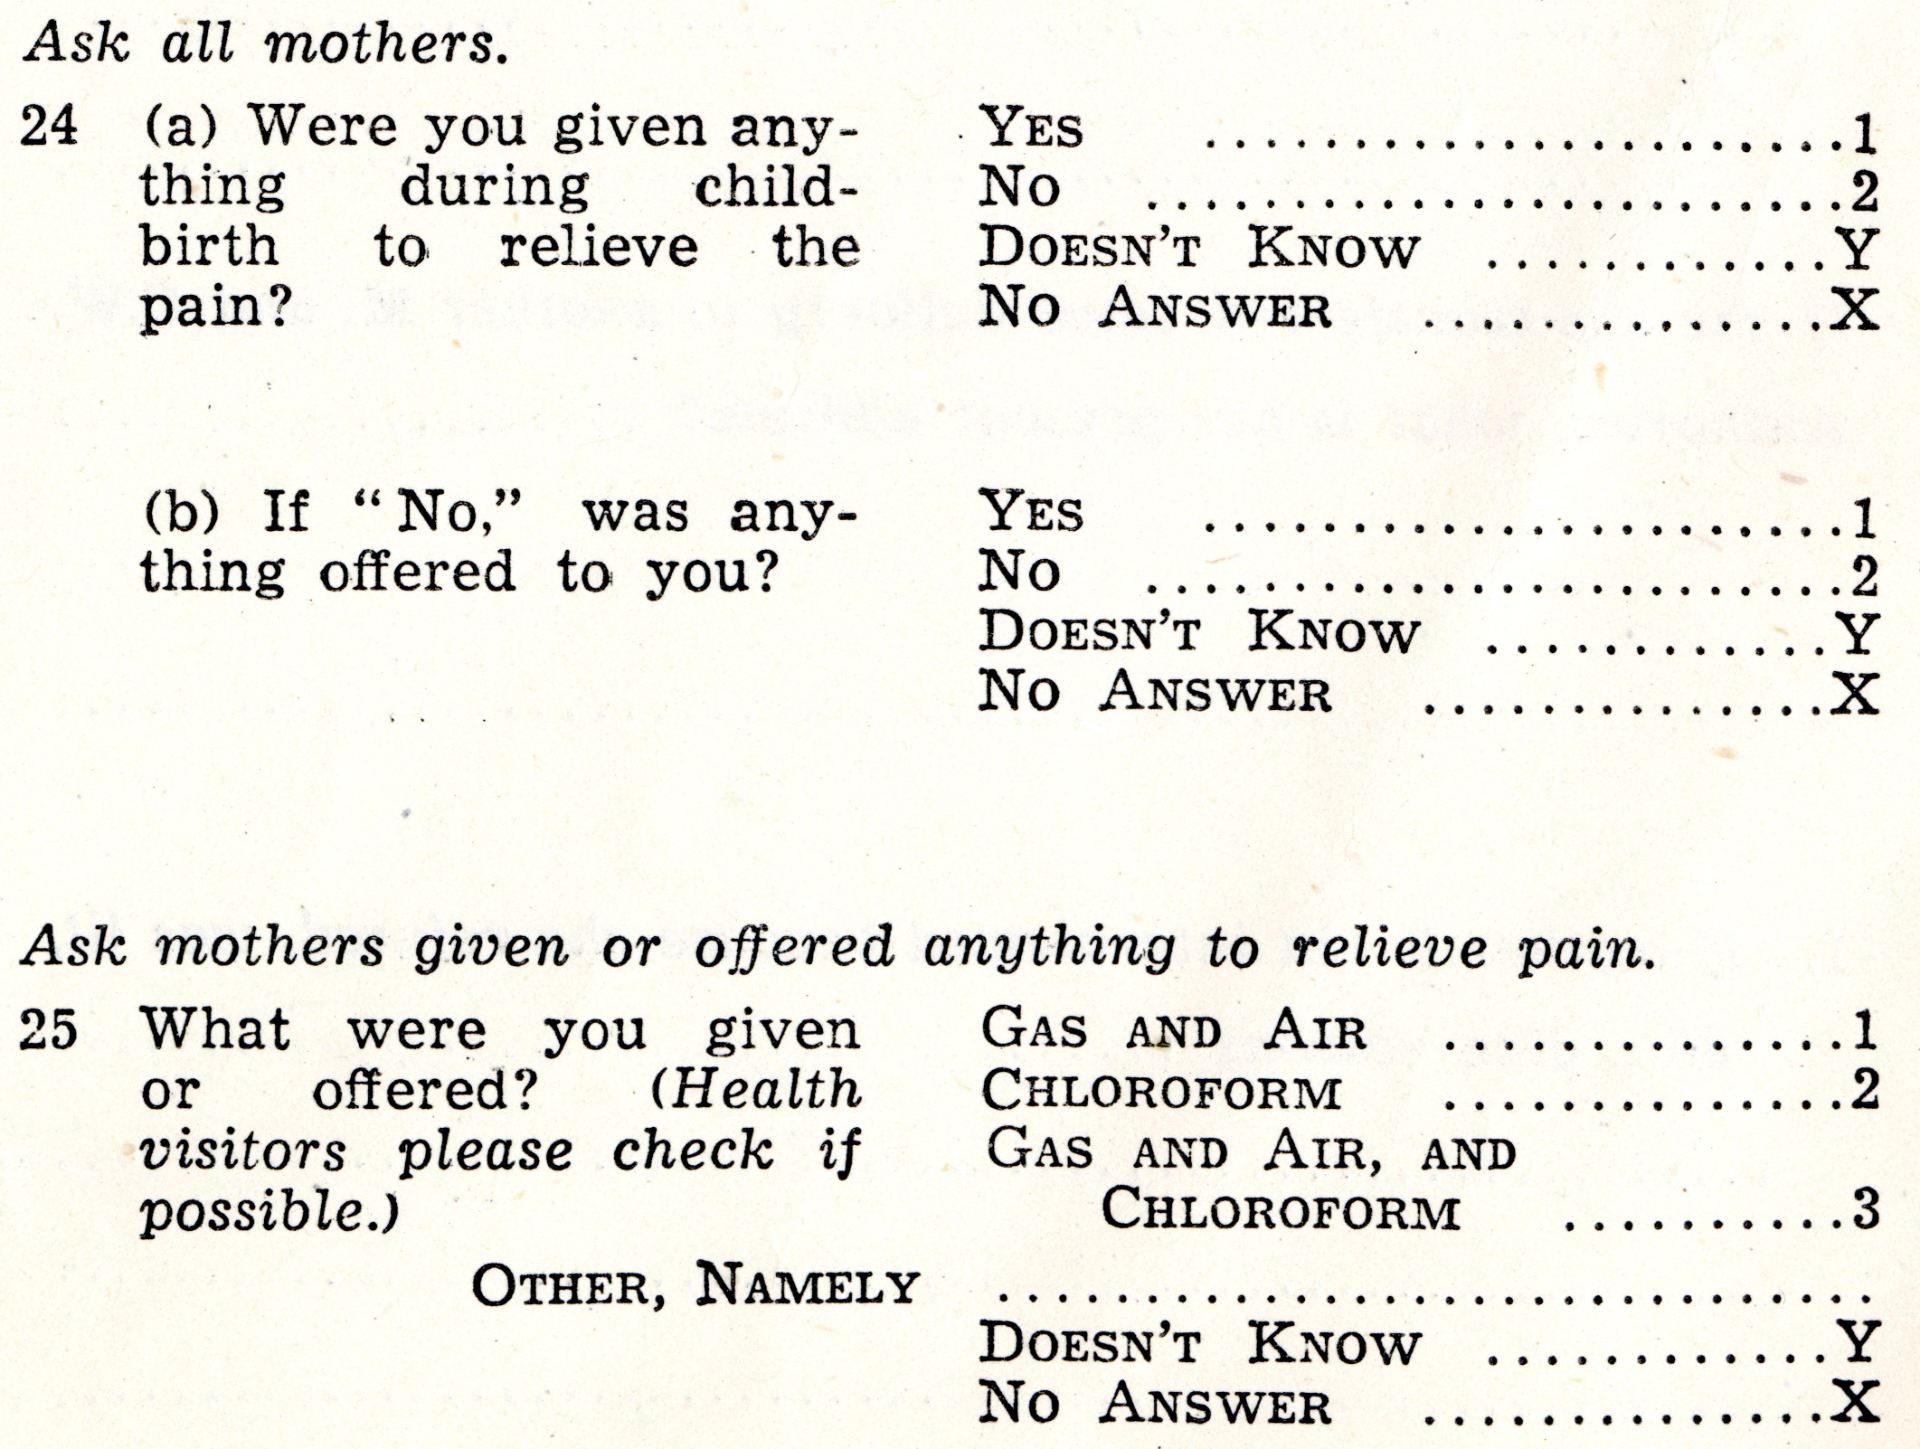 An extract from the 1946 maternity survey questionnaires, about whether received pain relief during childbirth.